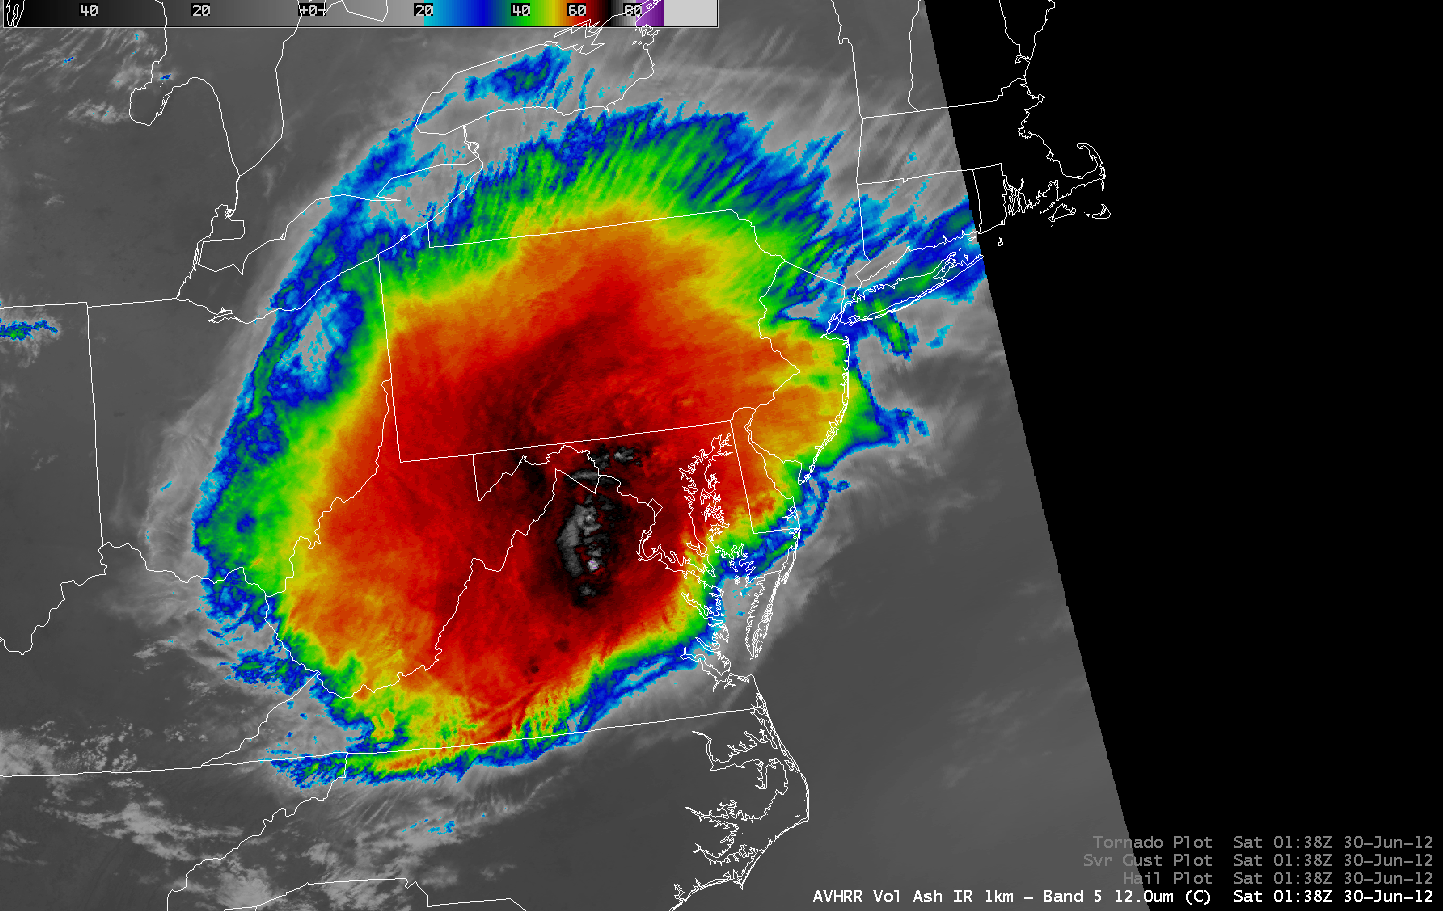 A derecho moving through the mid-Atlantic on June 30, 2012.